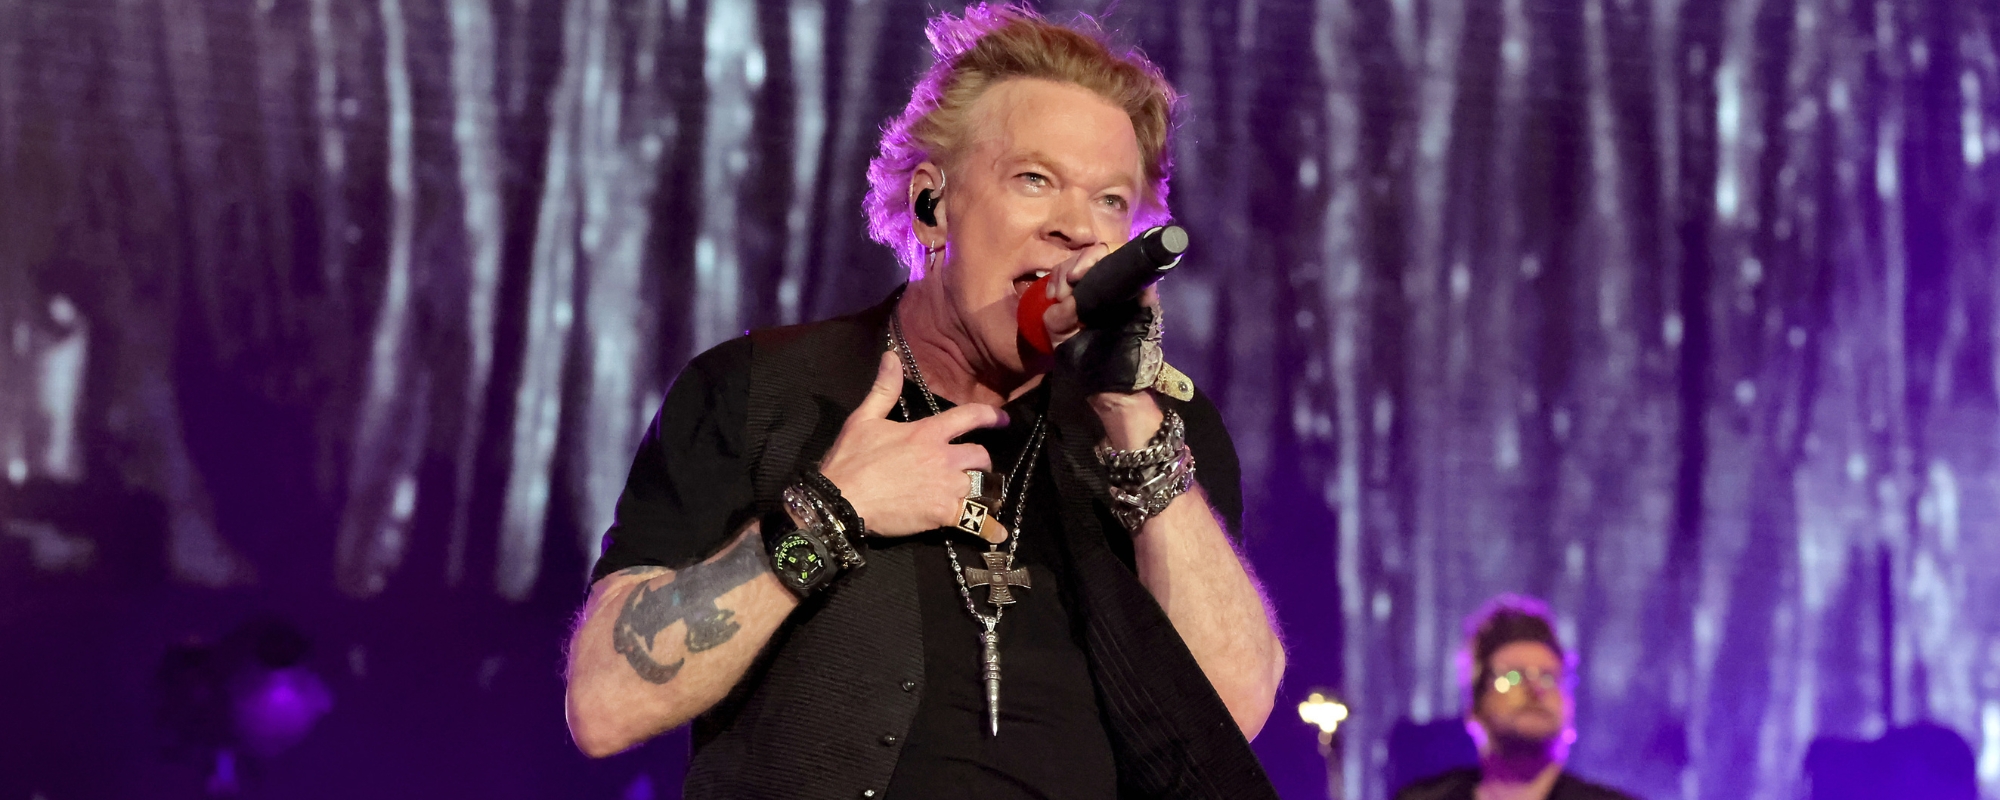 Guns N’ Roses Frontman Axl Rose Accused of a 1989 Sexual Assault in Newly Launched Lawsuit